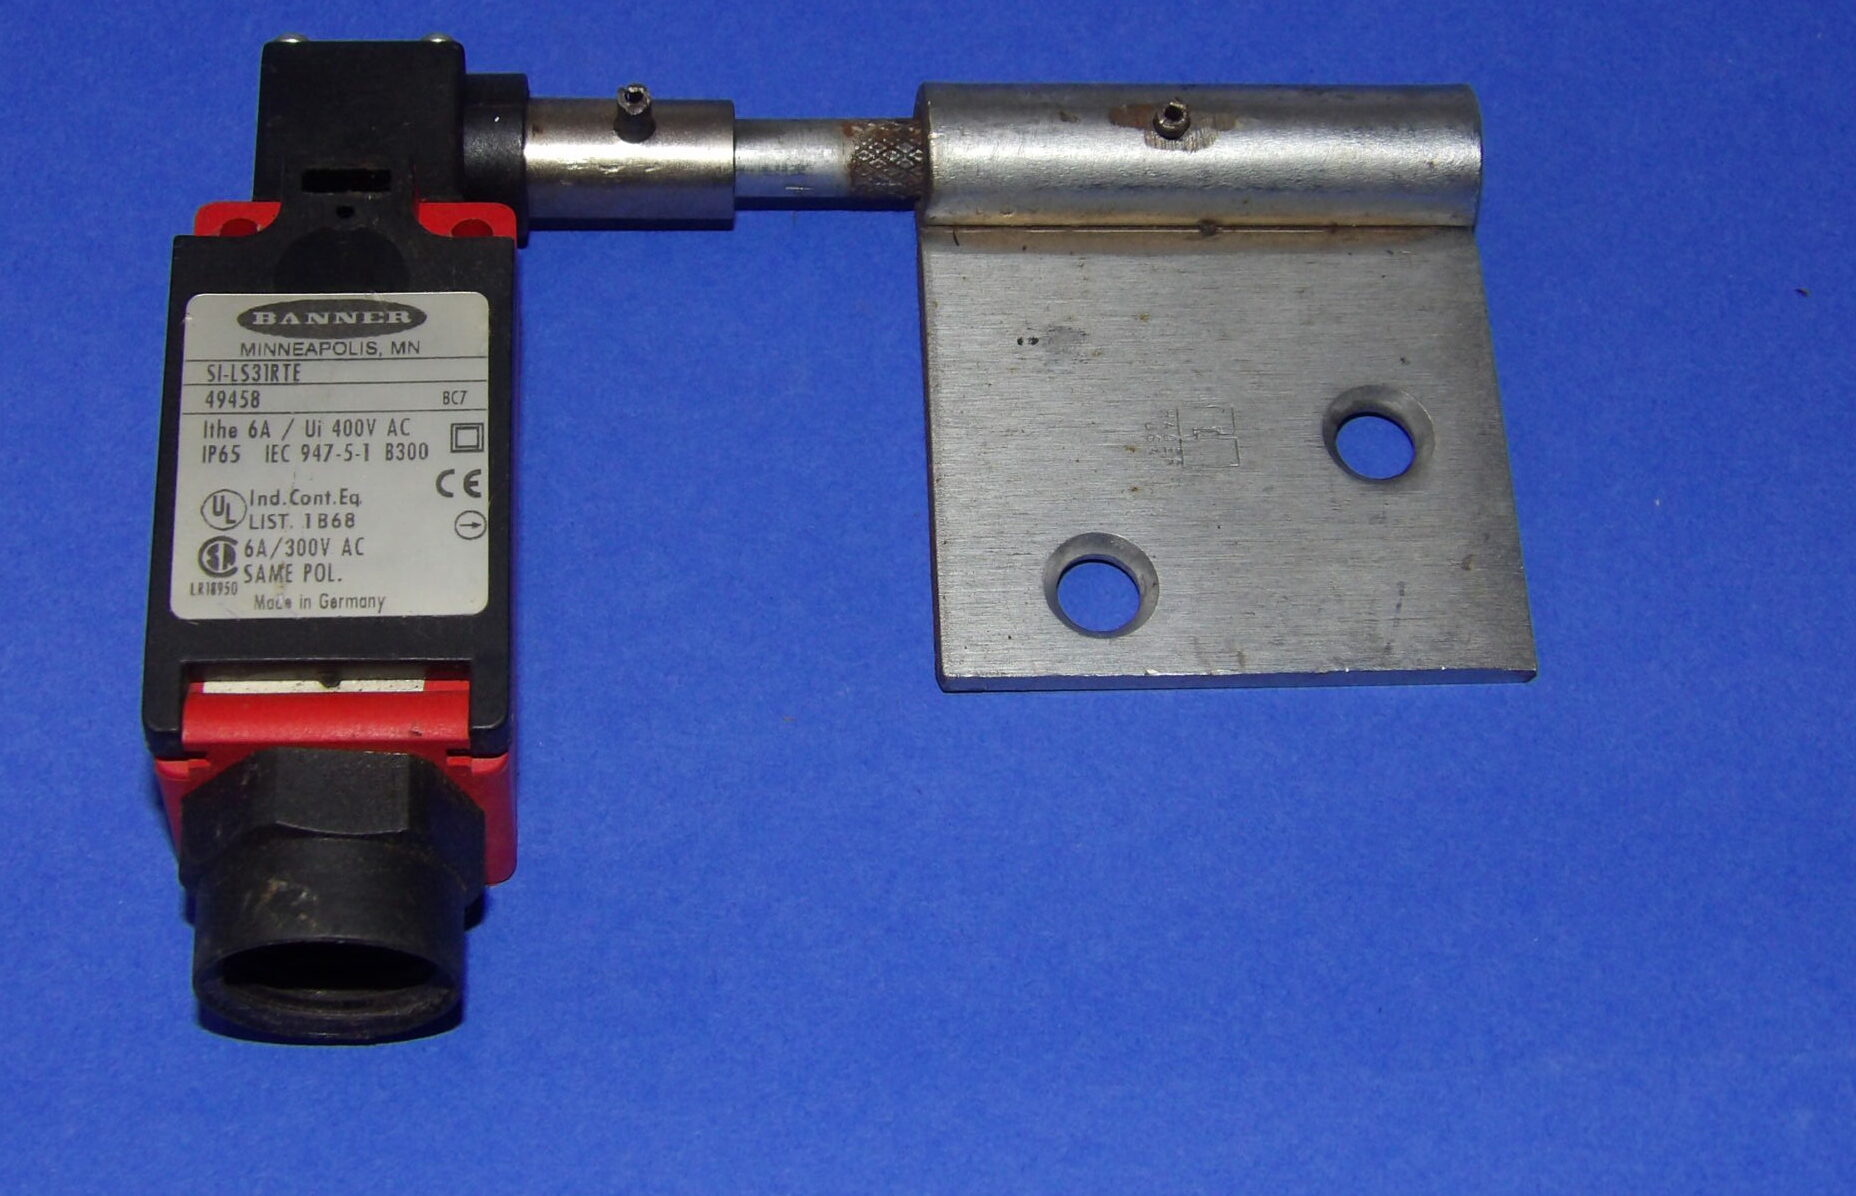 Banner SI-LS31RTE Hinged Limit Safety Switch + 1 Year Warranty